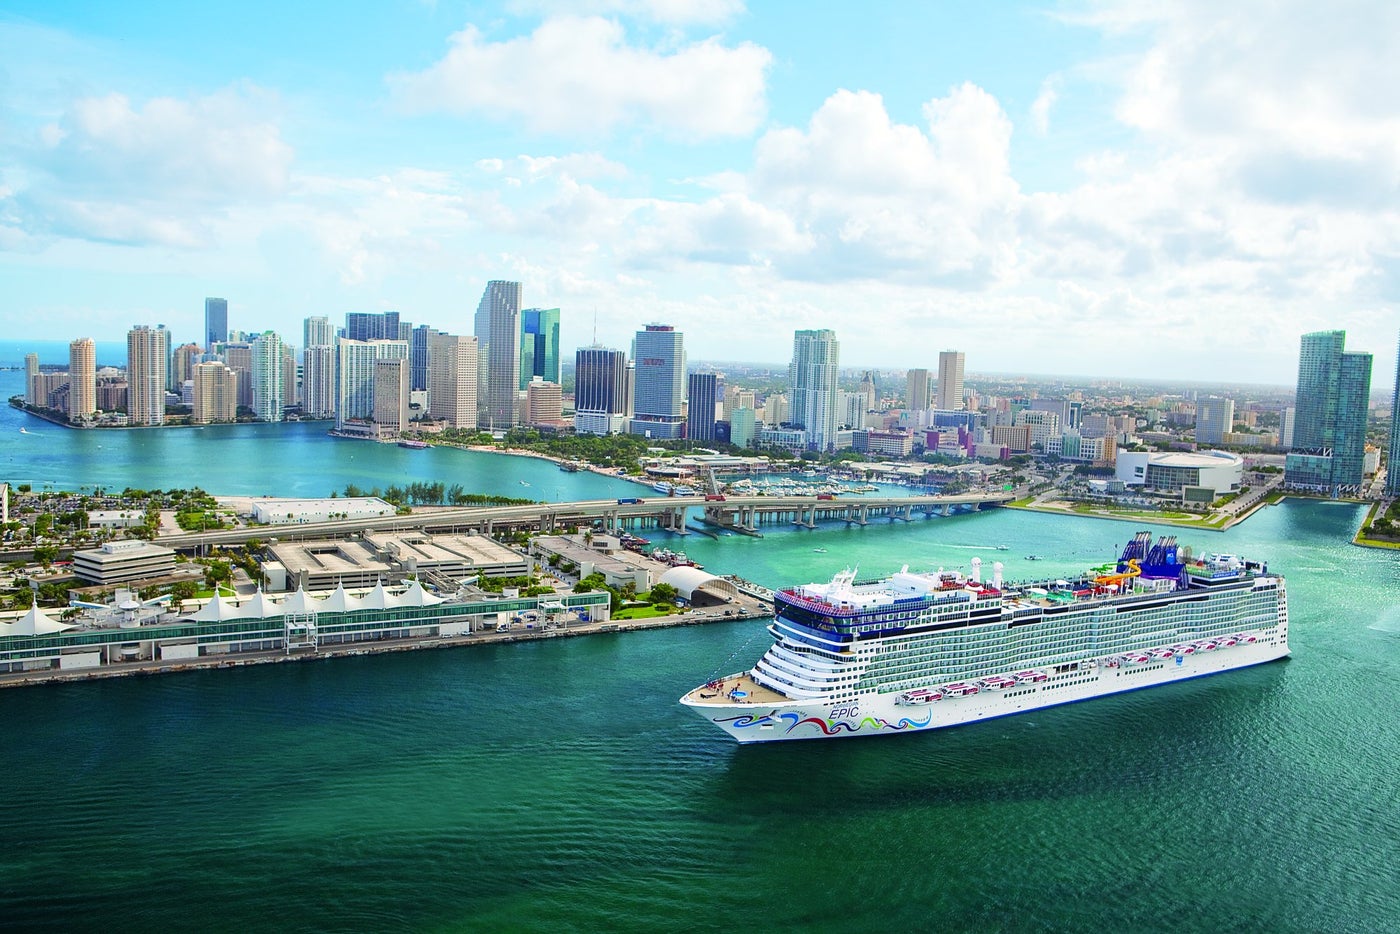 Miami cruise port guide Everything to know about hotels, sites, transfers